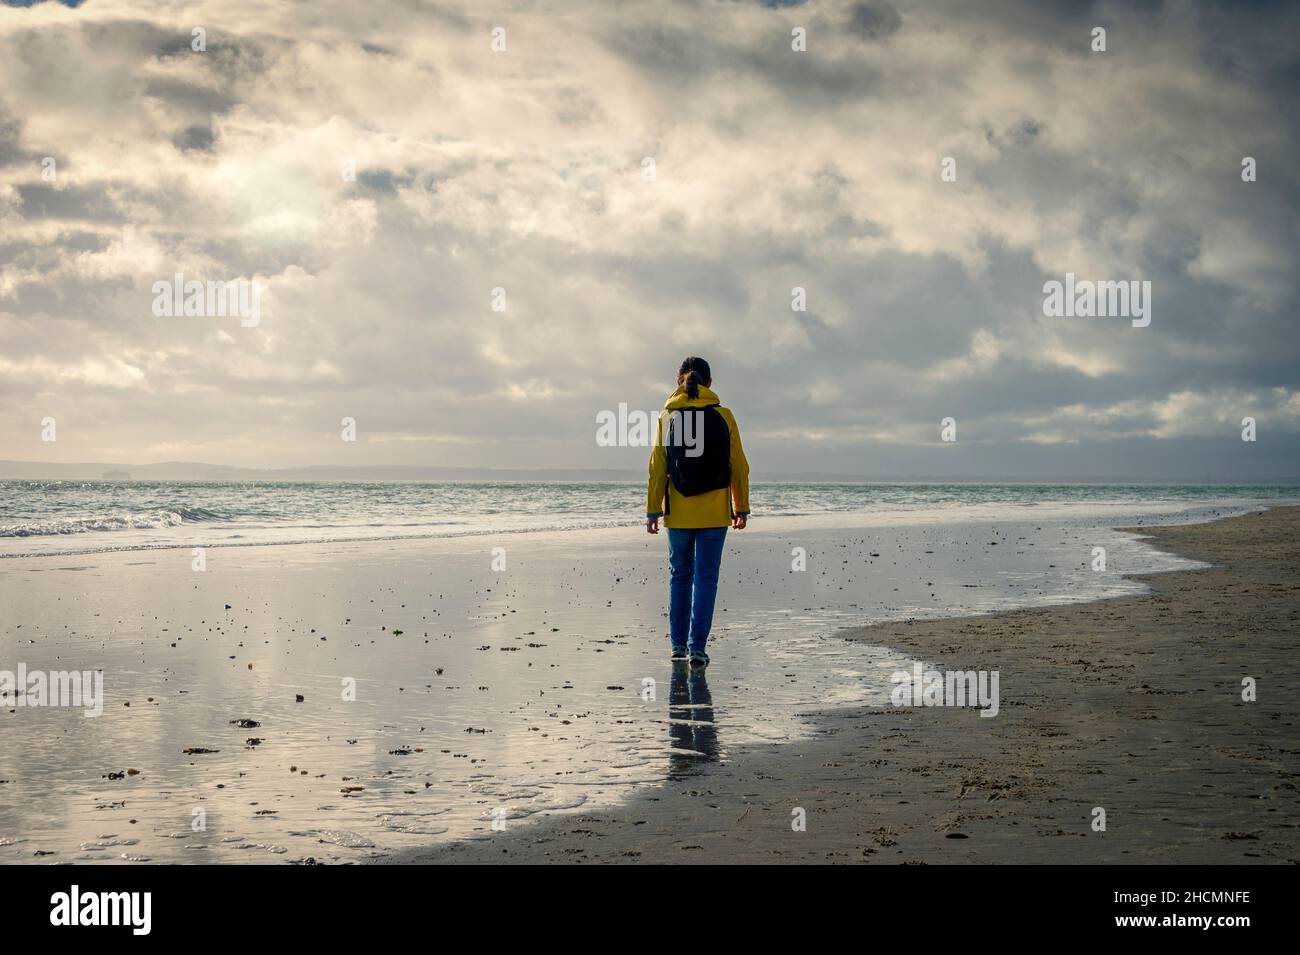 Rear view of a woman wearing a yellow jacket and backpack walking along the wet sand at the edge of the sea. Stock Photo